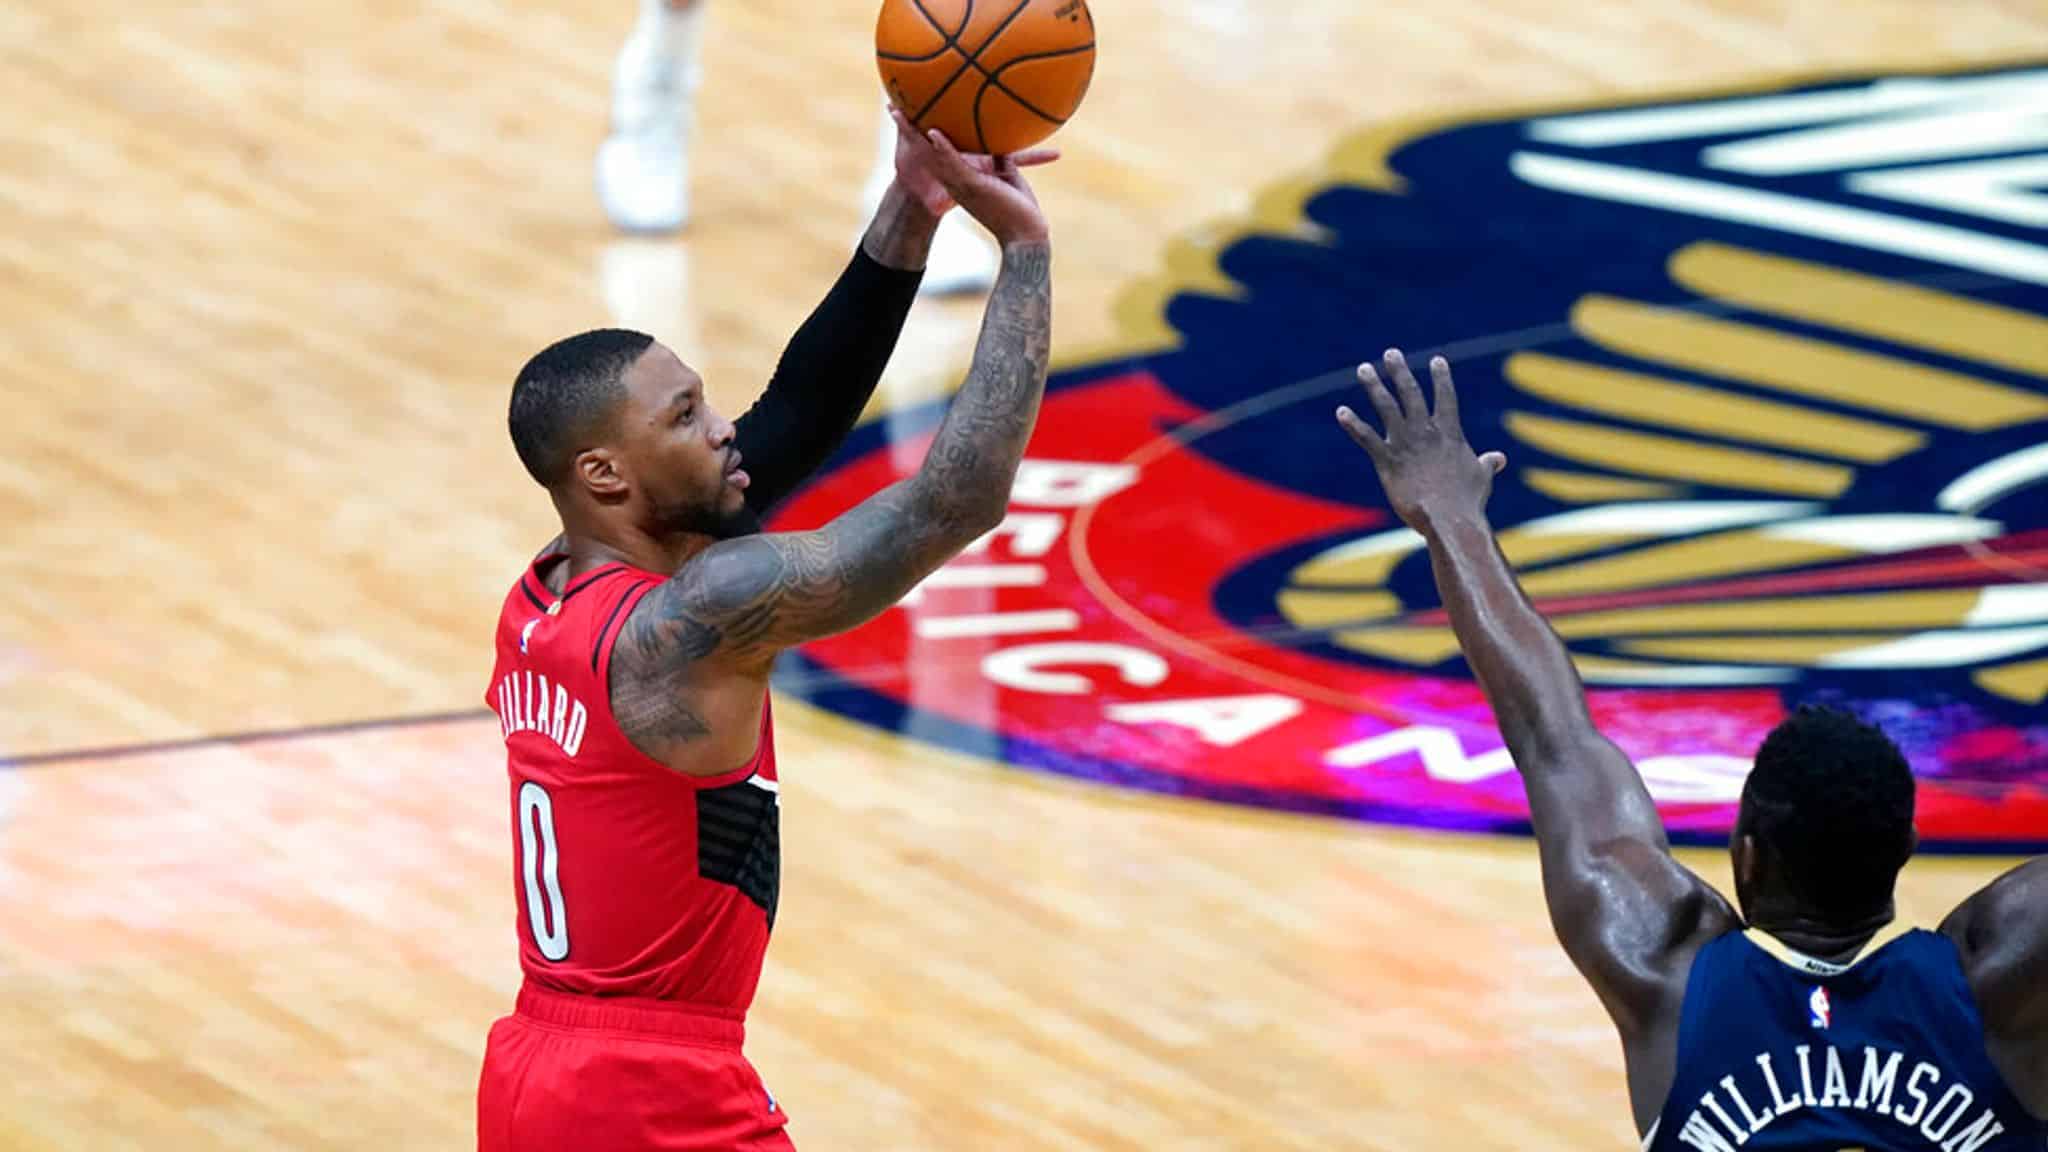 March 16th Pelicans at Trail Blazers